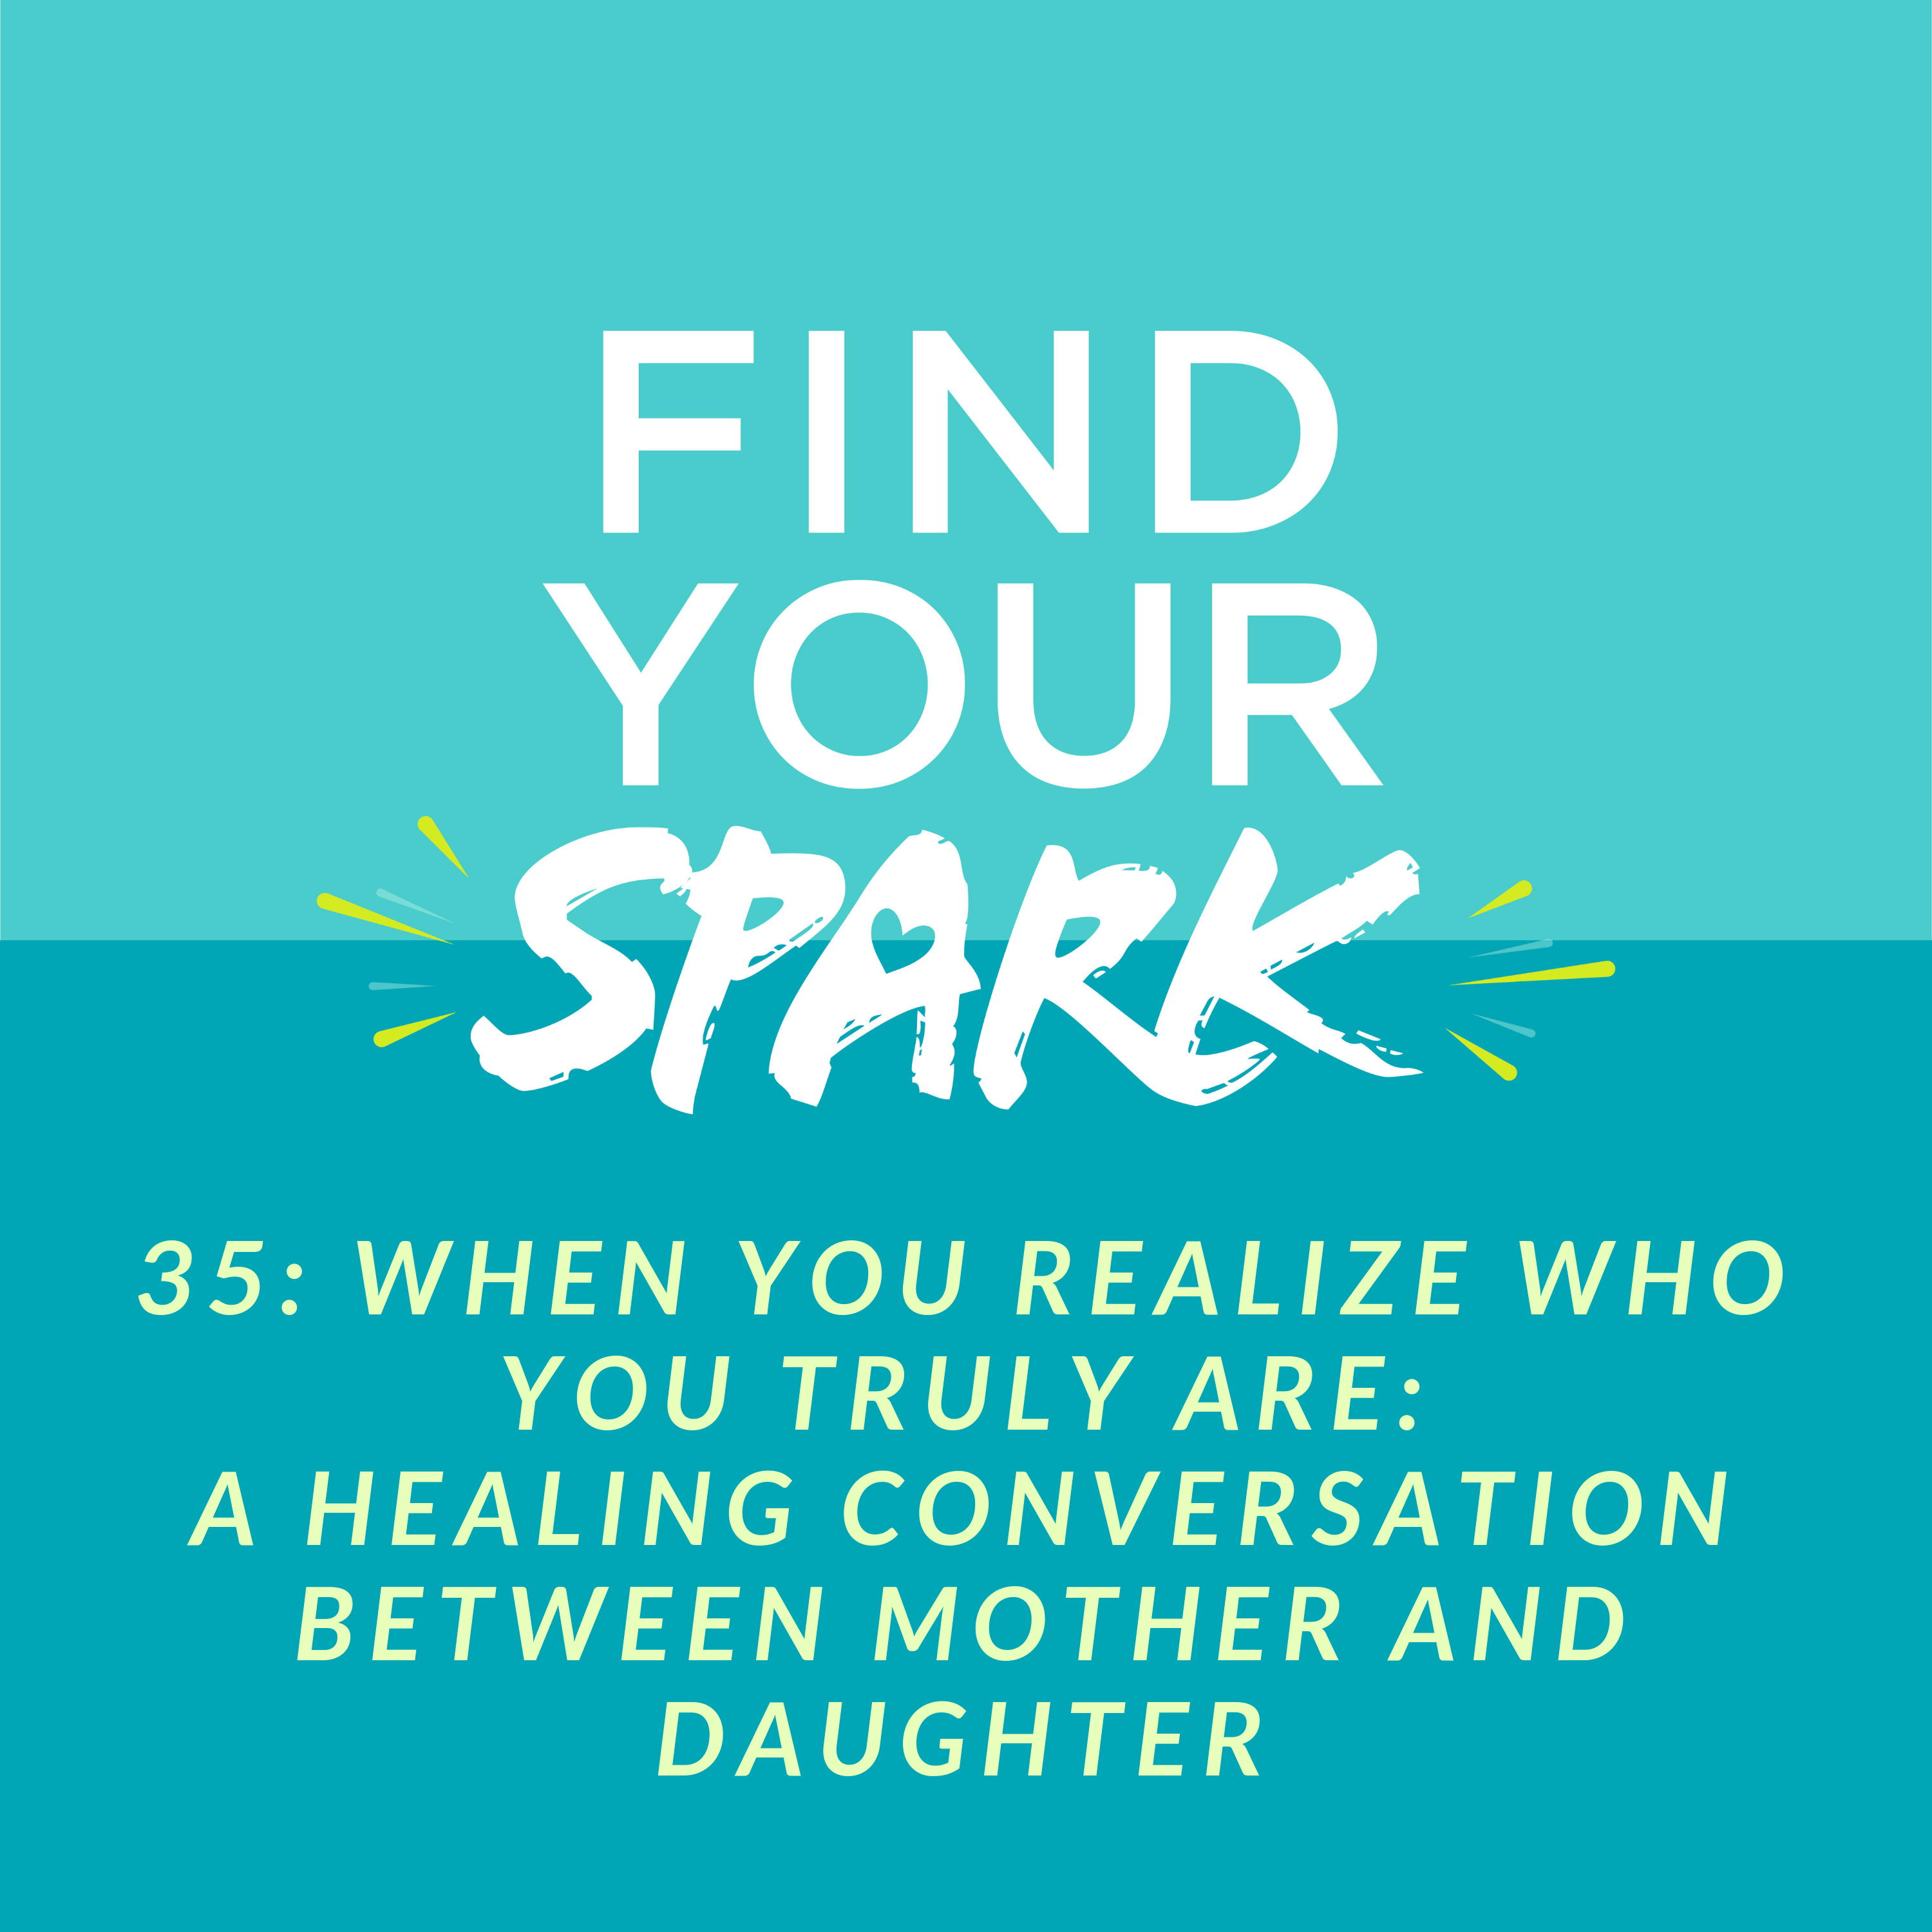 35: When You Realize Who YOU Truly Are: A healing conversation between Mother and Daughter